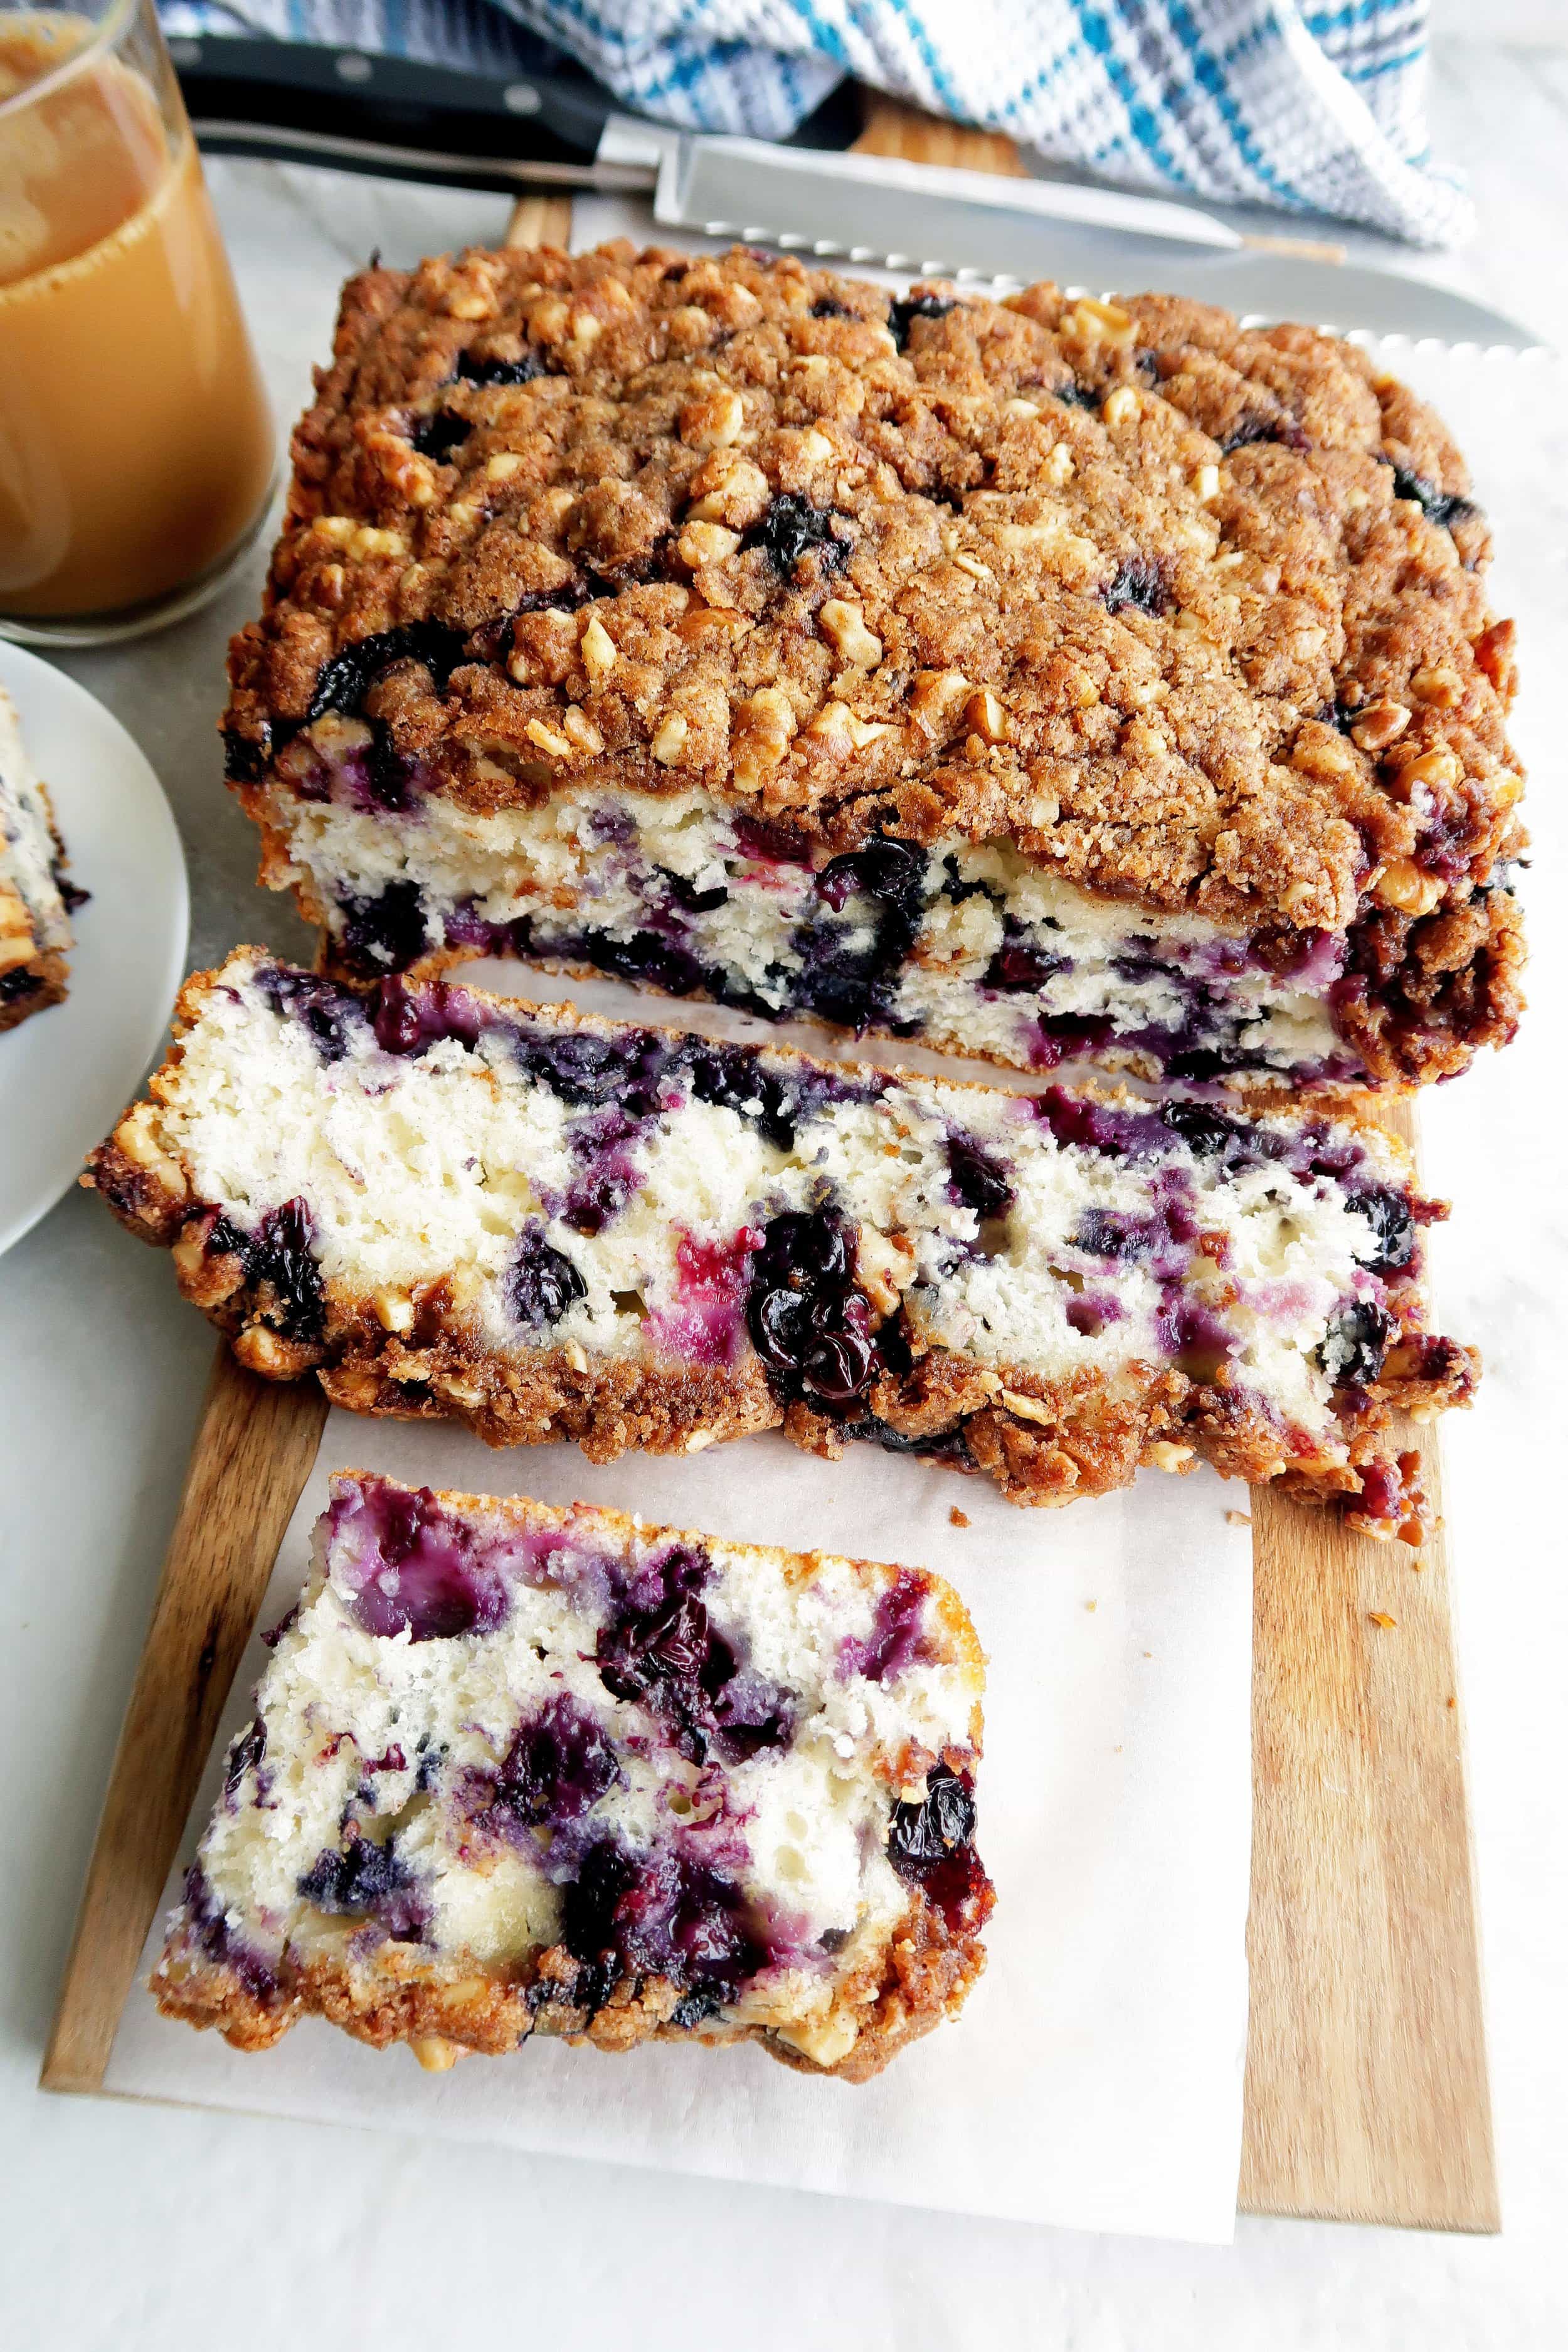 Sliced blueberry coffee cake with brown sugar-walnut crumble on a long wooden board.